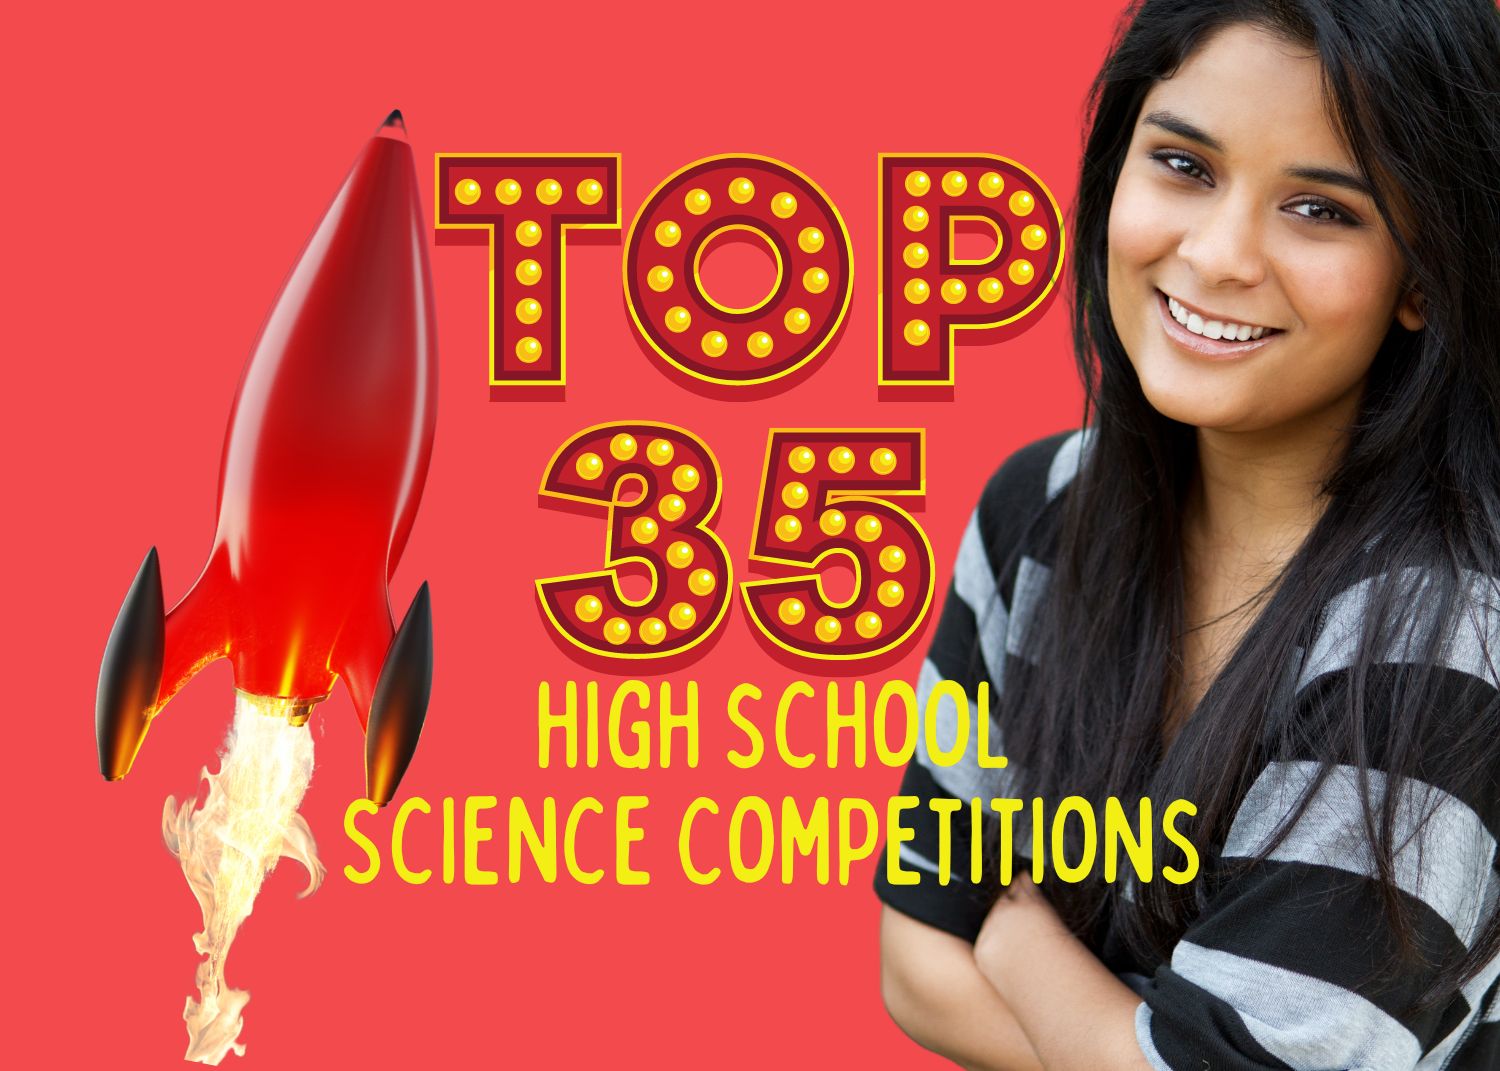 35 Top Science Competitions for High School Students